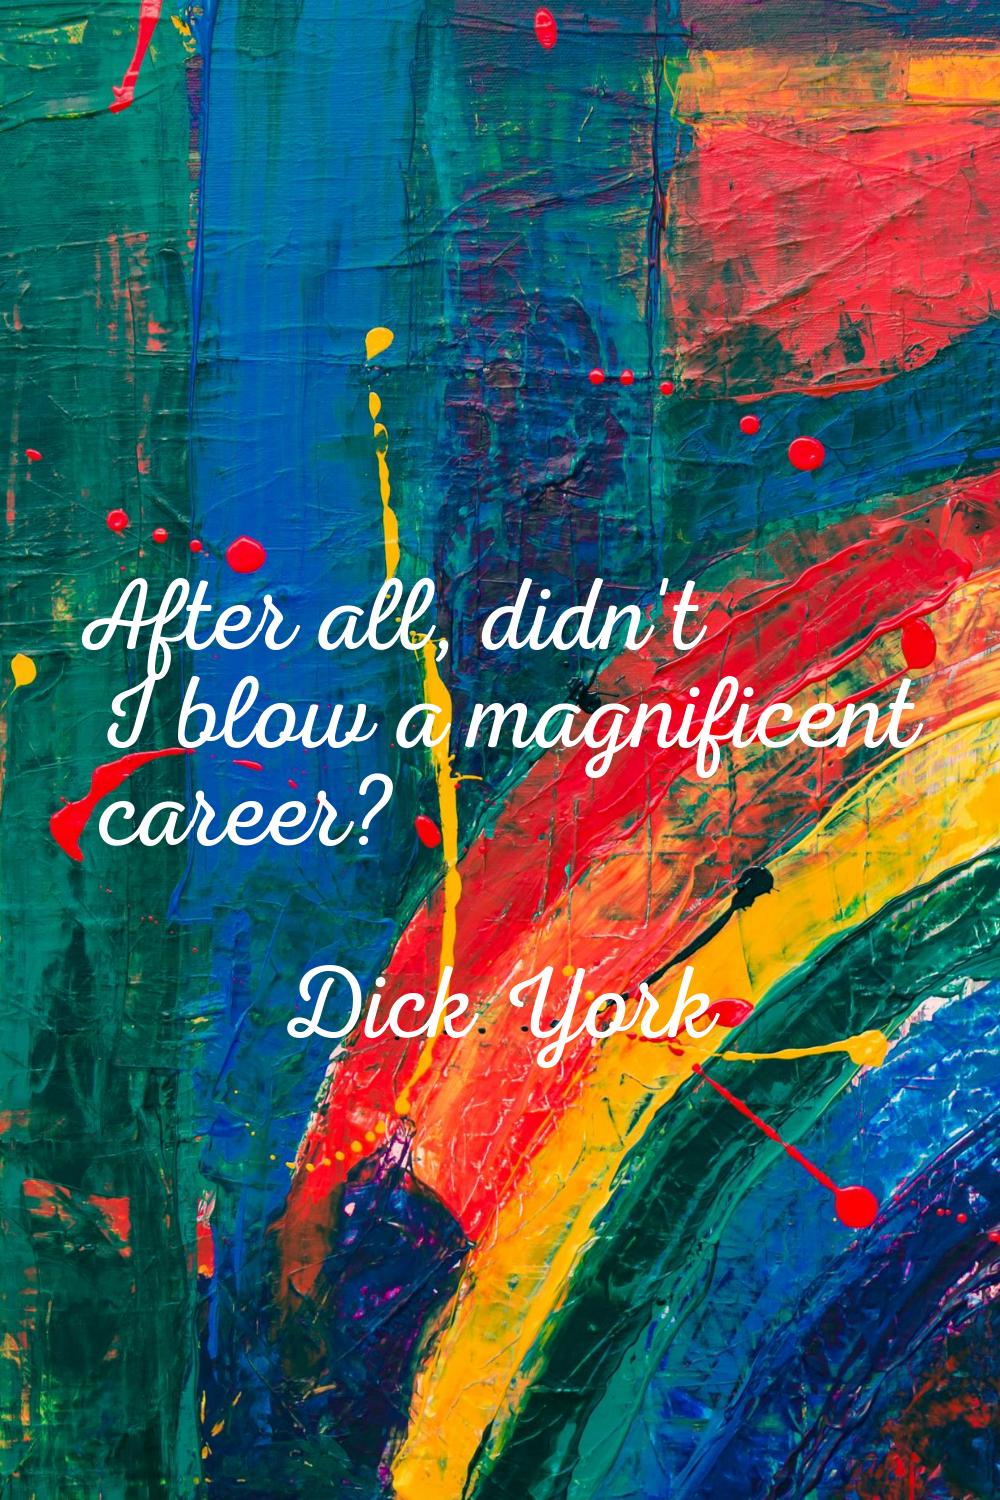 After all, didn't I blow a magnificent career?